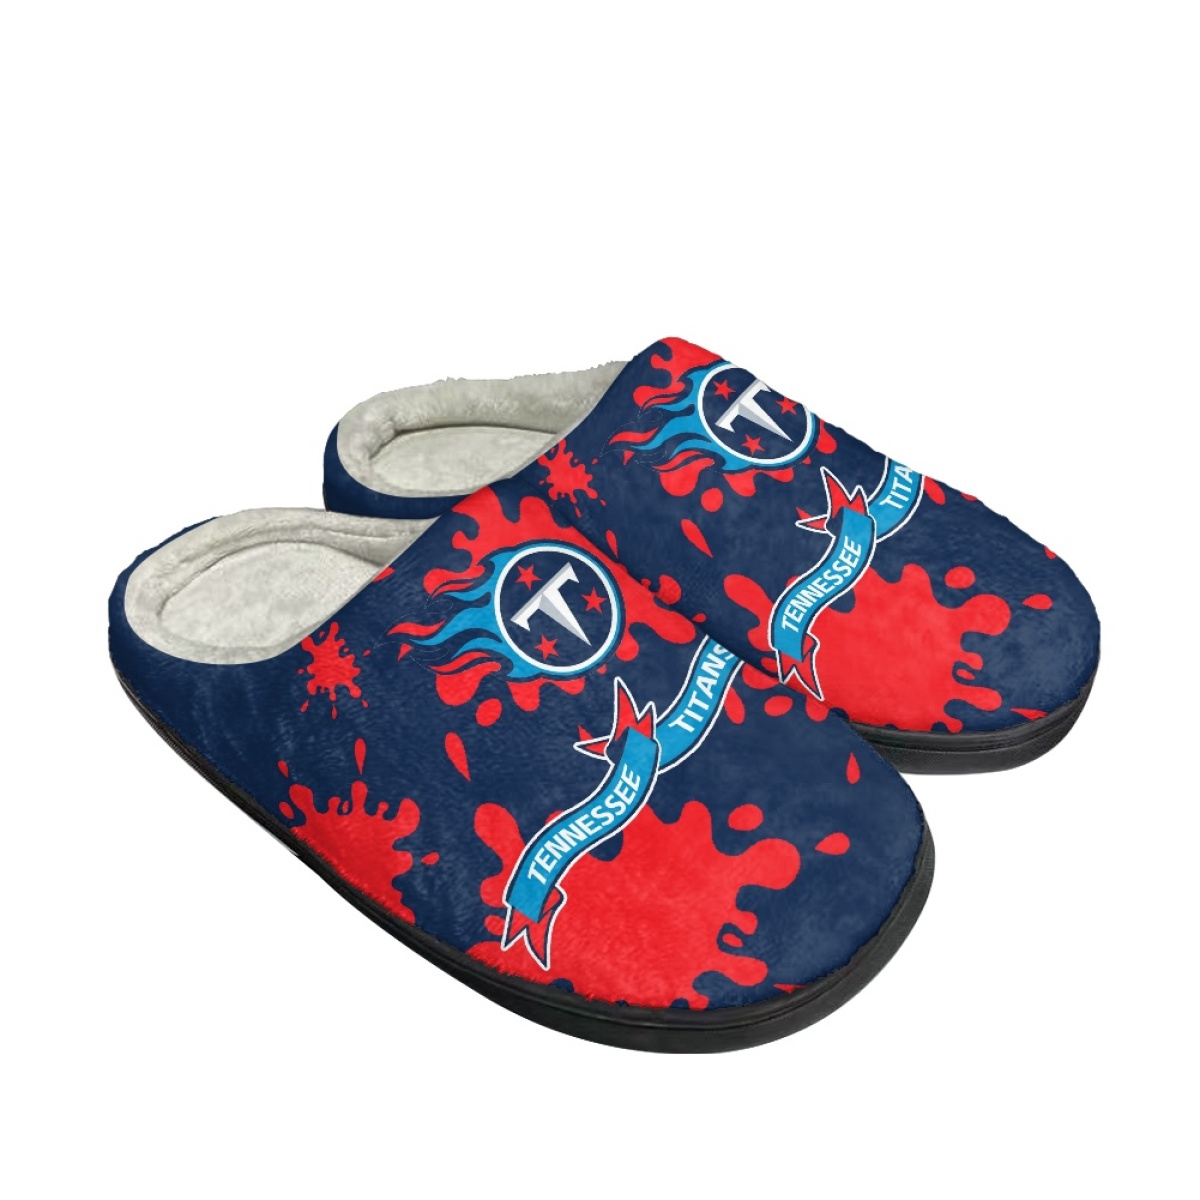 Men's Tennessee Titans Slippers/Shoes 006